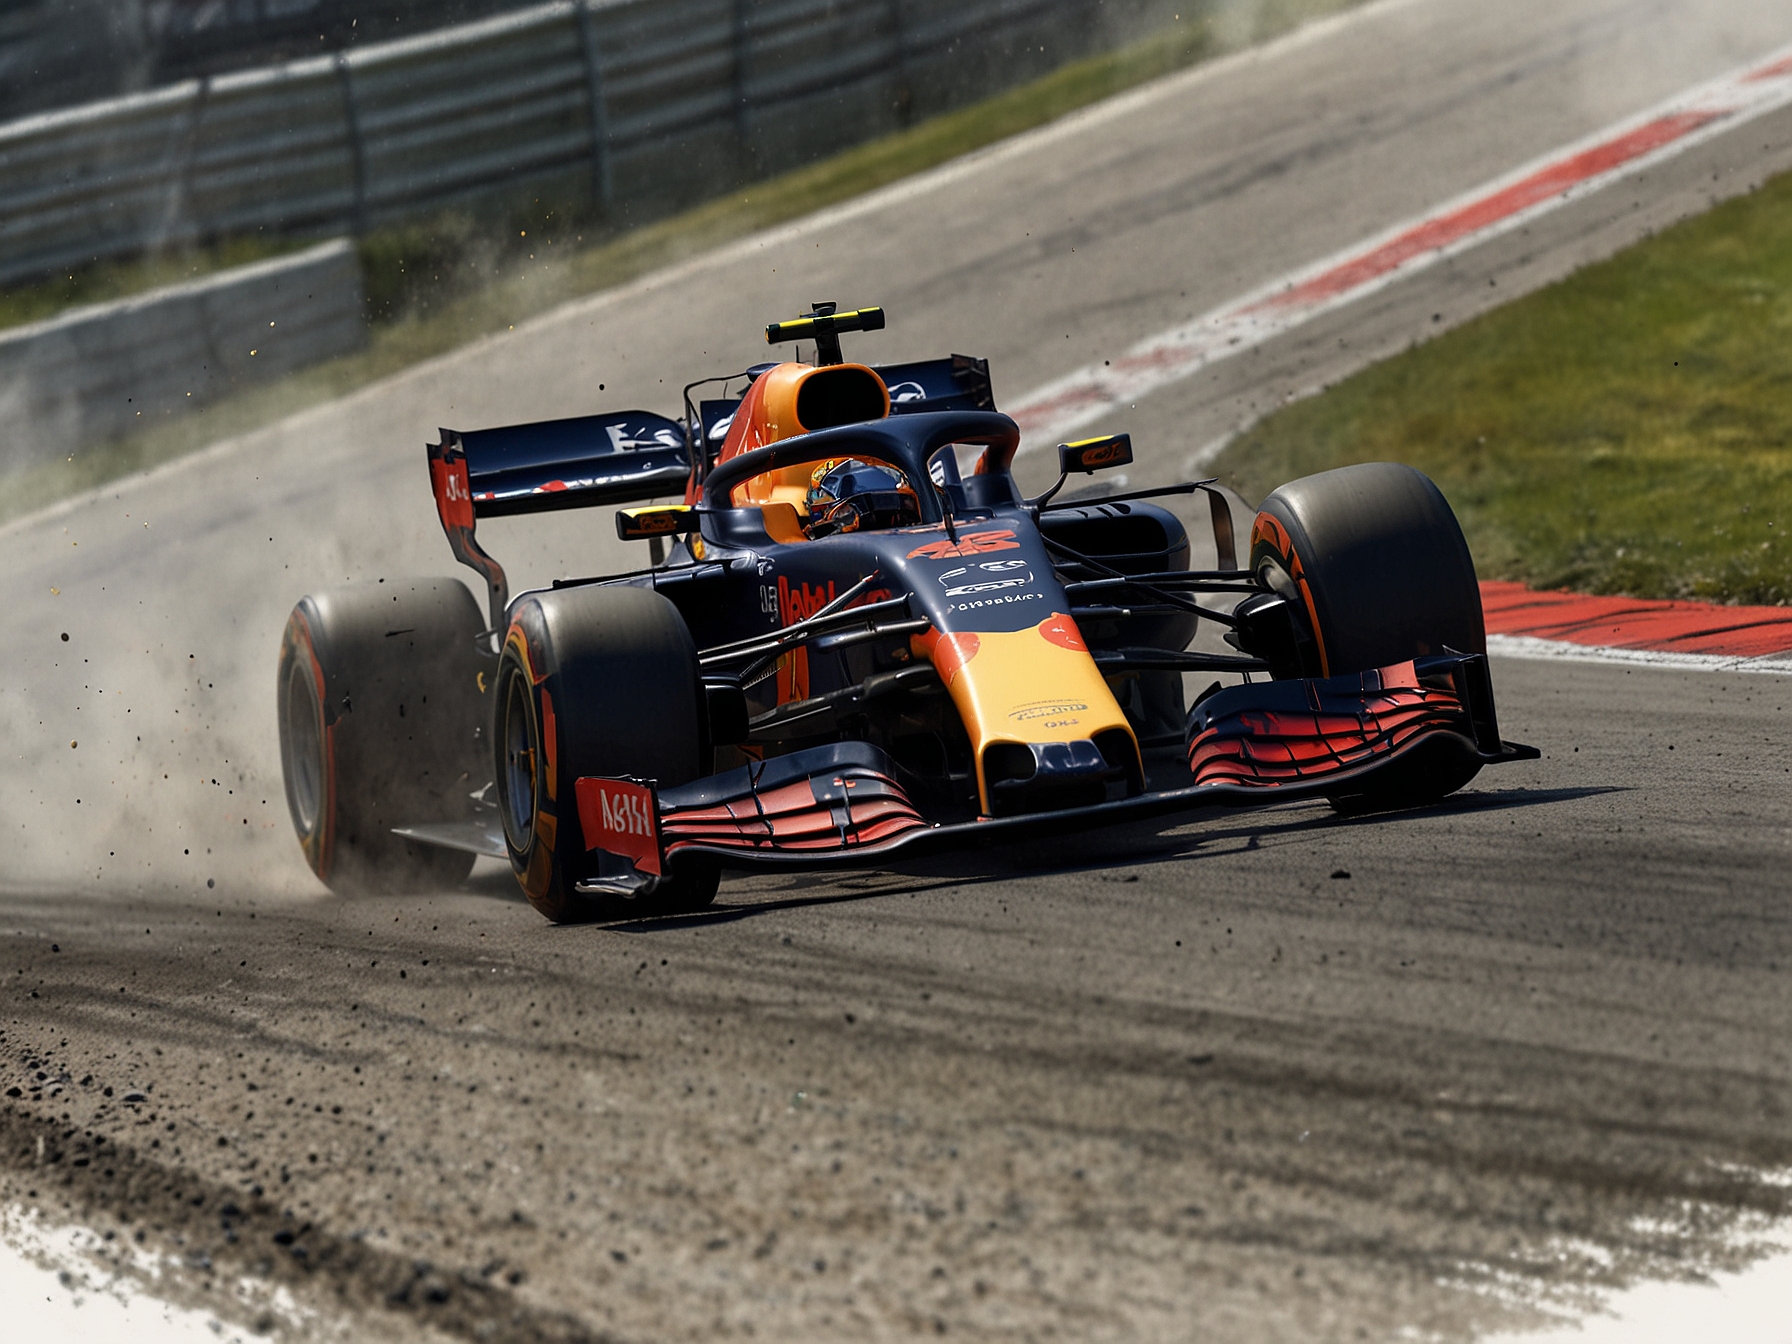 An action shot of Max Verstappen and Lando Norris racing at the Red Bull Ring, moments before their dramatic collision at Turn 3 during the 2024 Austrian Grand Prix.